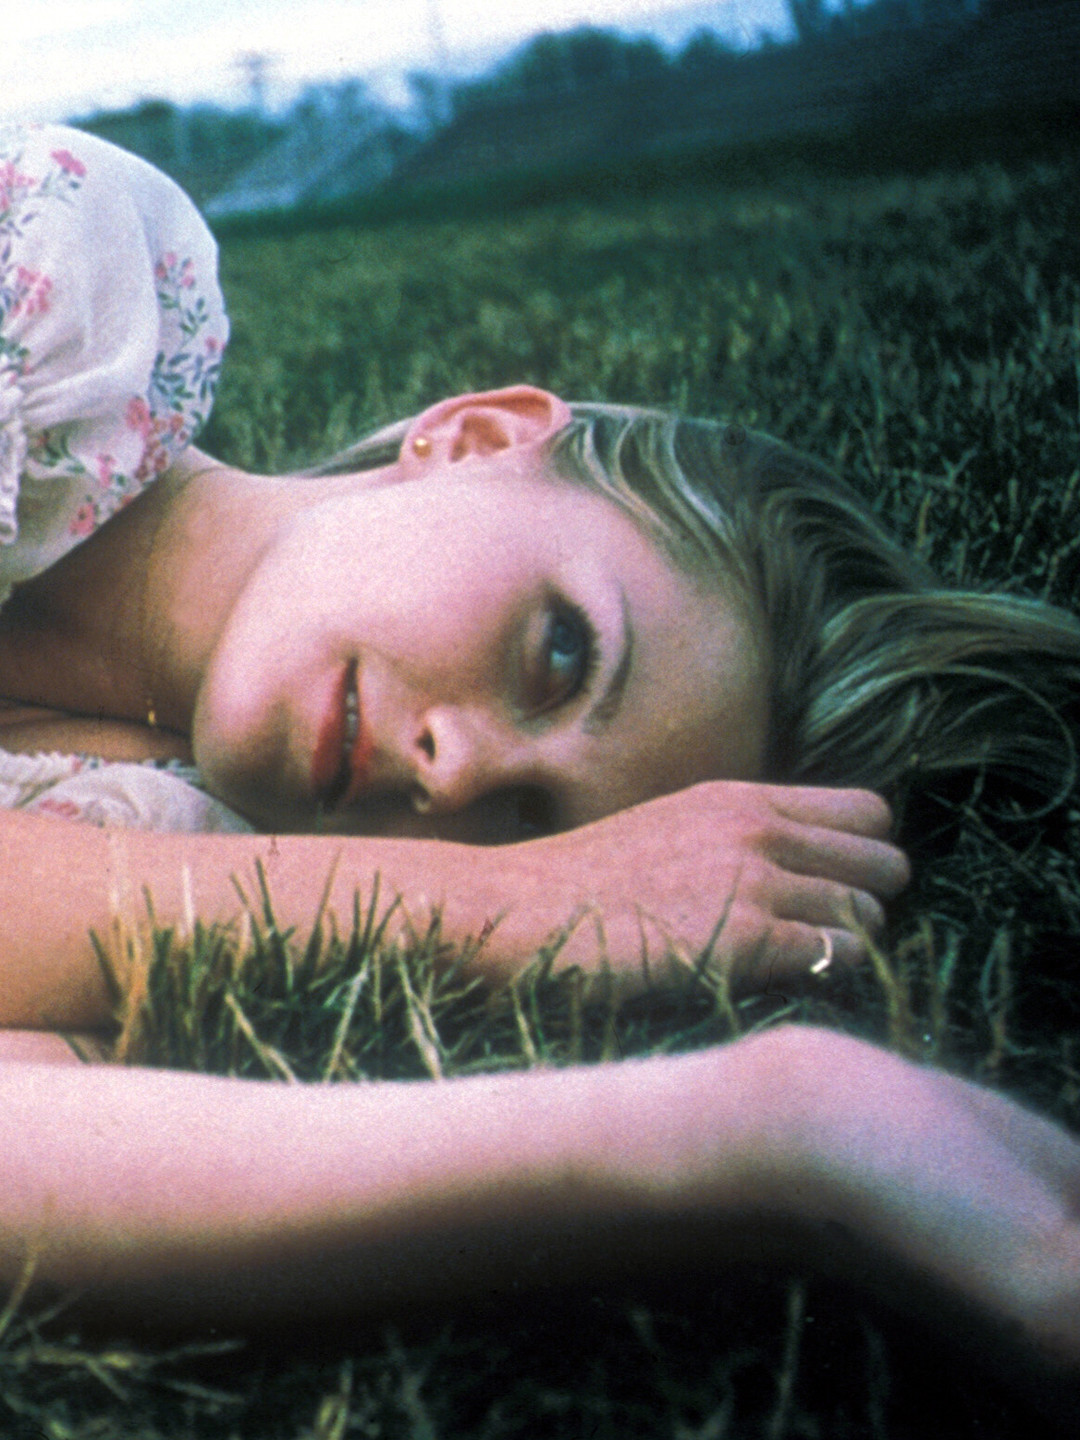 The Virgin Suicides Trailer 1 Trailers And Videos Rotten Tomatoes